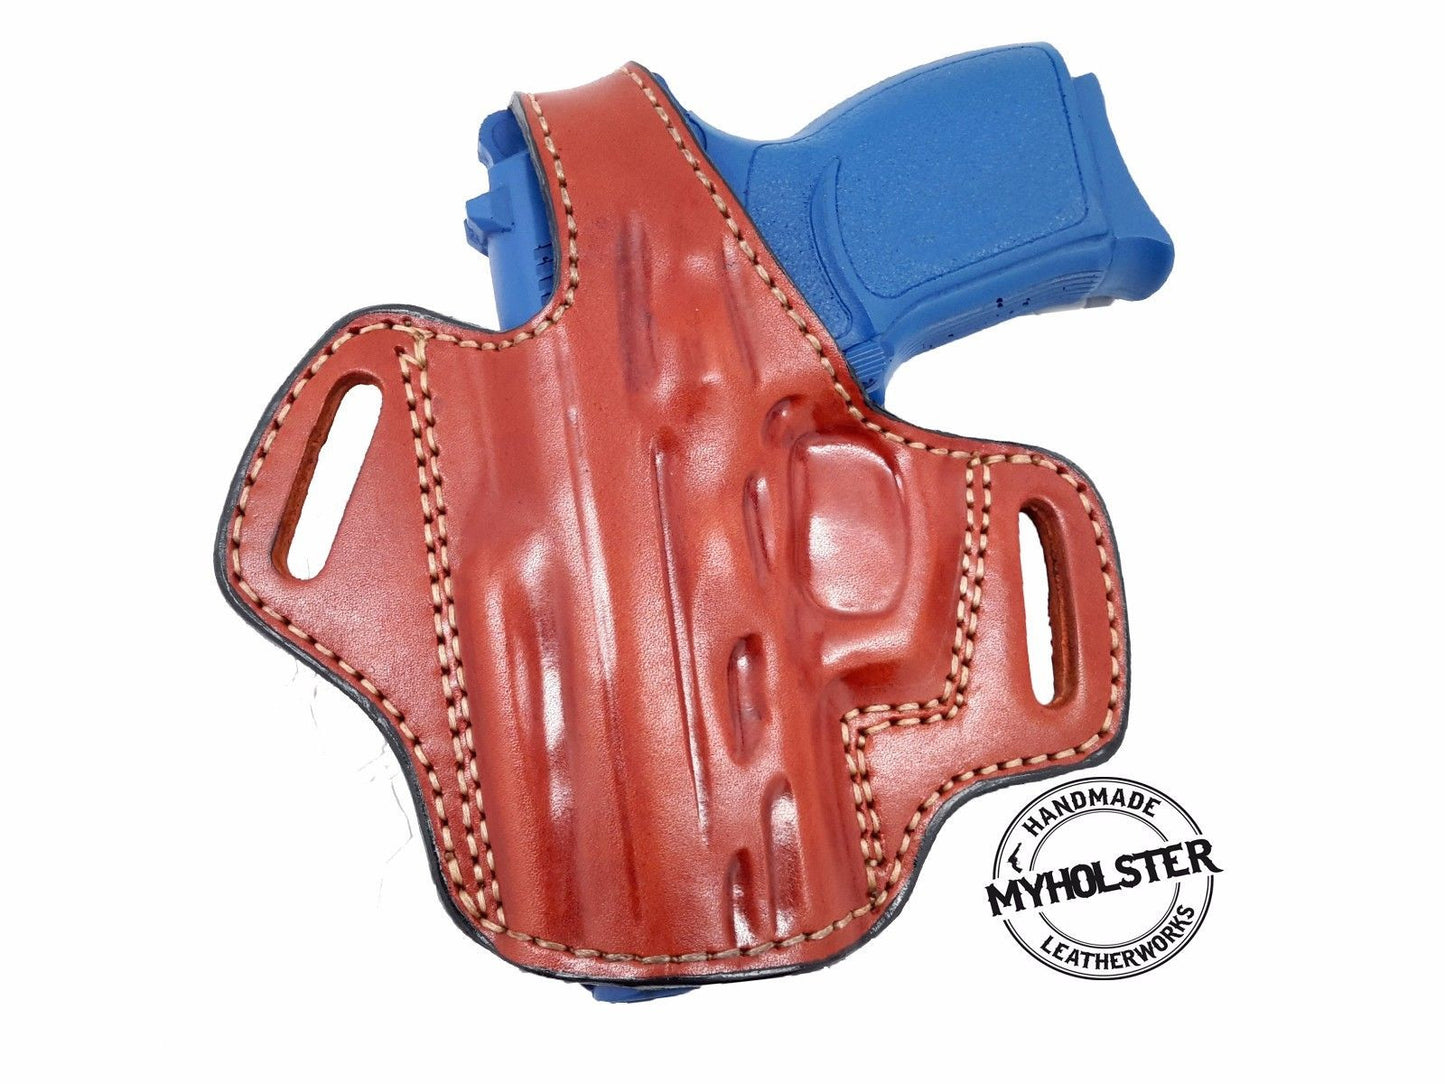 Astra A-75 OWB Thumb Break Leather Belt Holster- Choose your Hand & Color